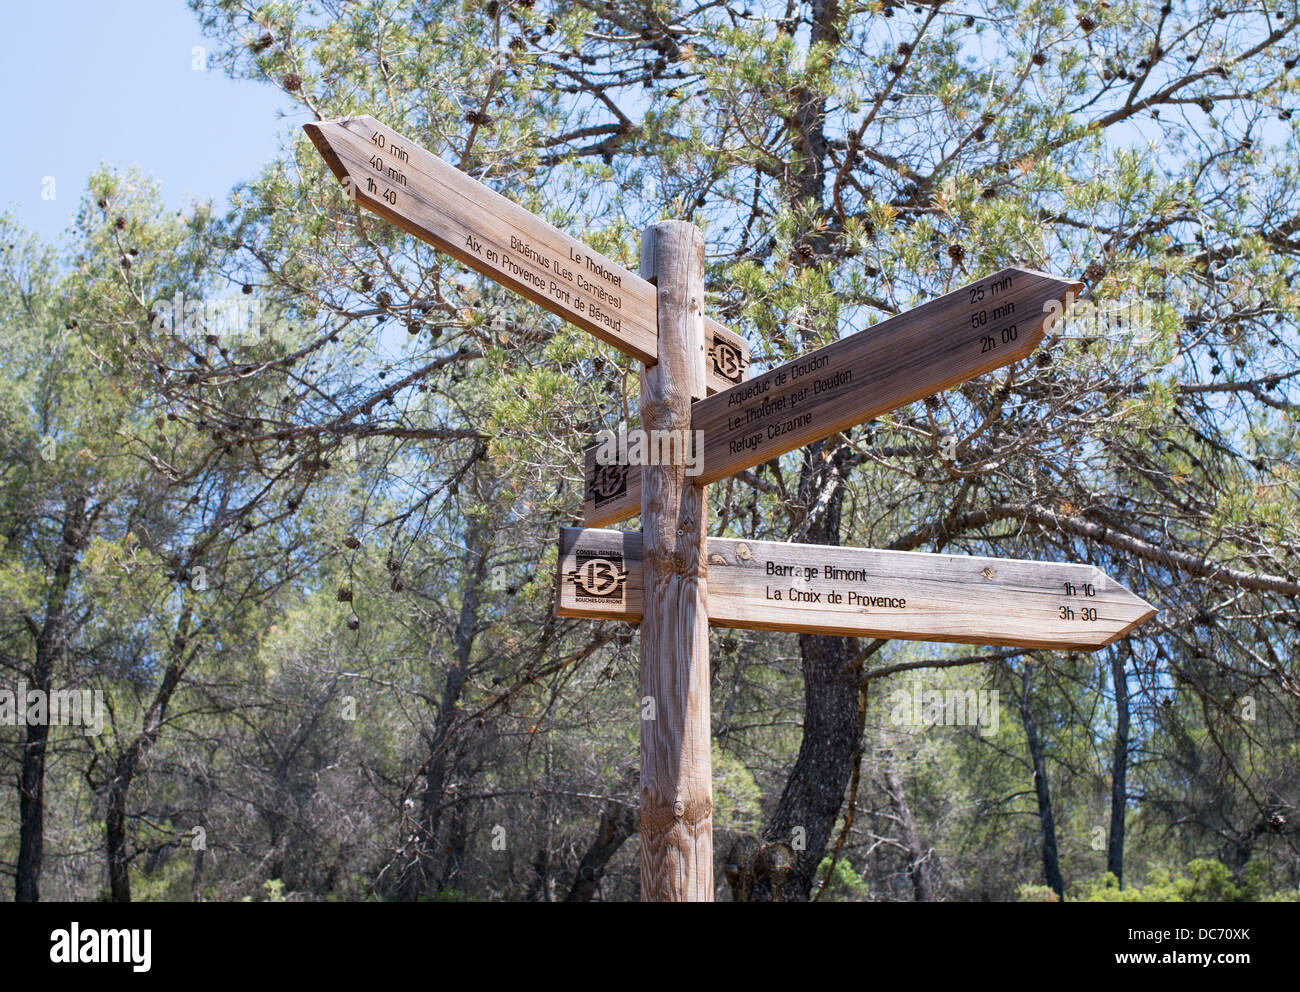 Wooden footpath signpost near to Le Tholonet, Aix en Provence, France Stock Photo